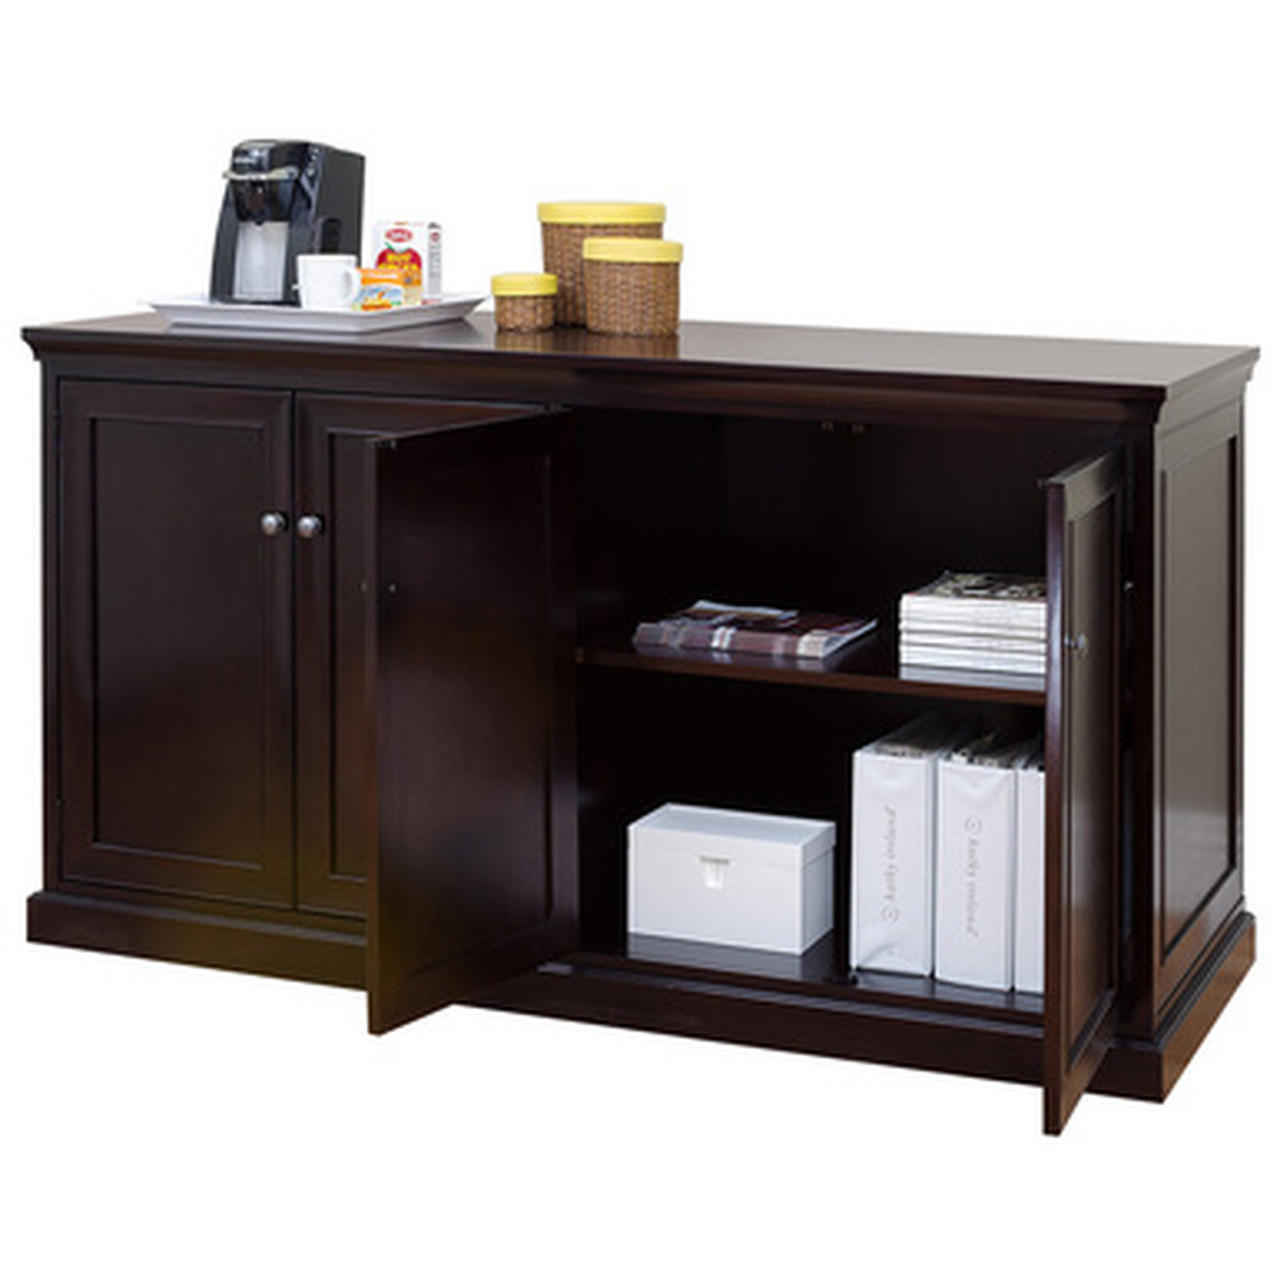  Office Source Markle Collection Espresso Wood 68" x 24" Buffet Cabinet FL688 